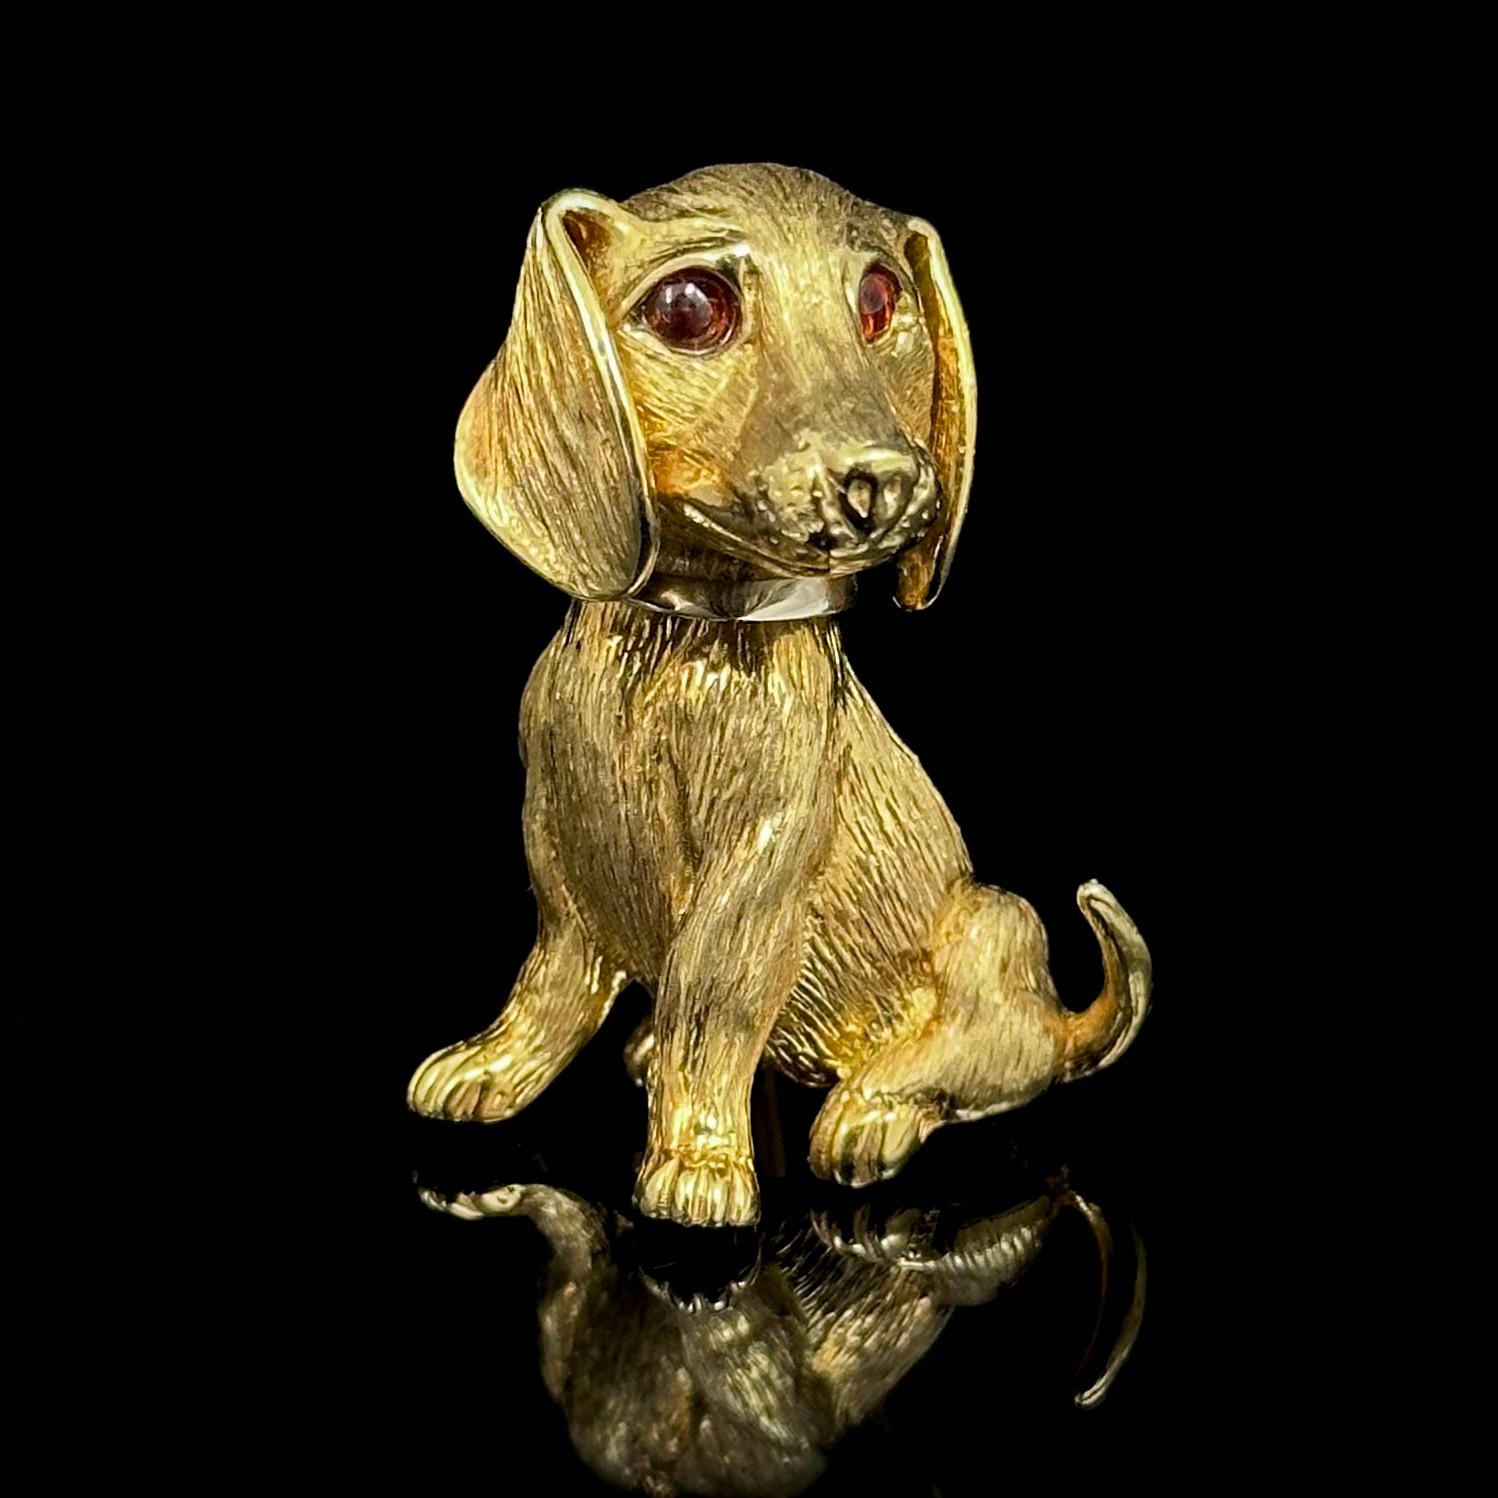 Tiffany & Co. Mid-Century Garnet Dachshund Dog Brooch in Yellow Gold, circa 1960. Modelled as a sitting dachshund dog with a raised tail, the canine is beautifully crafted in yellow gold with a realistically carved Florentine finishing depicting its